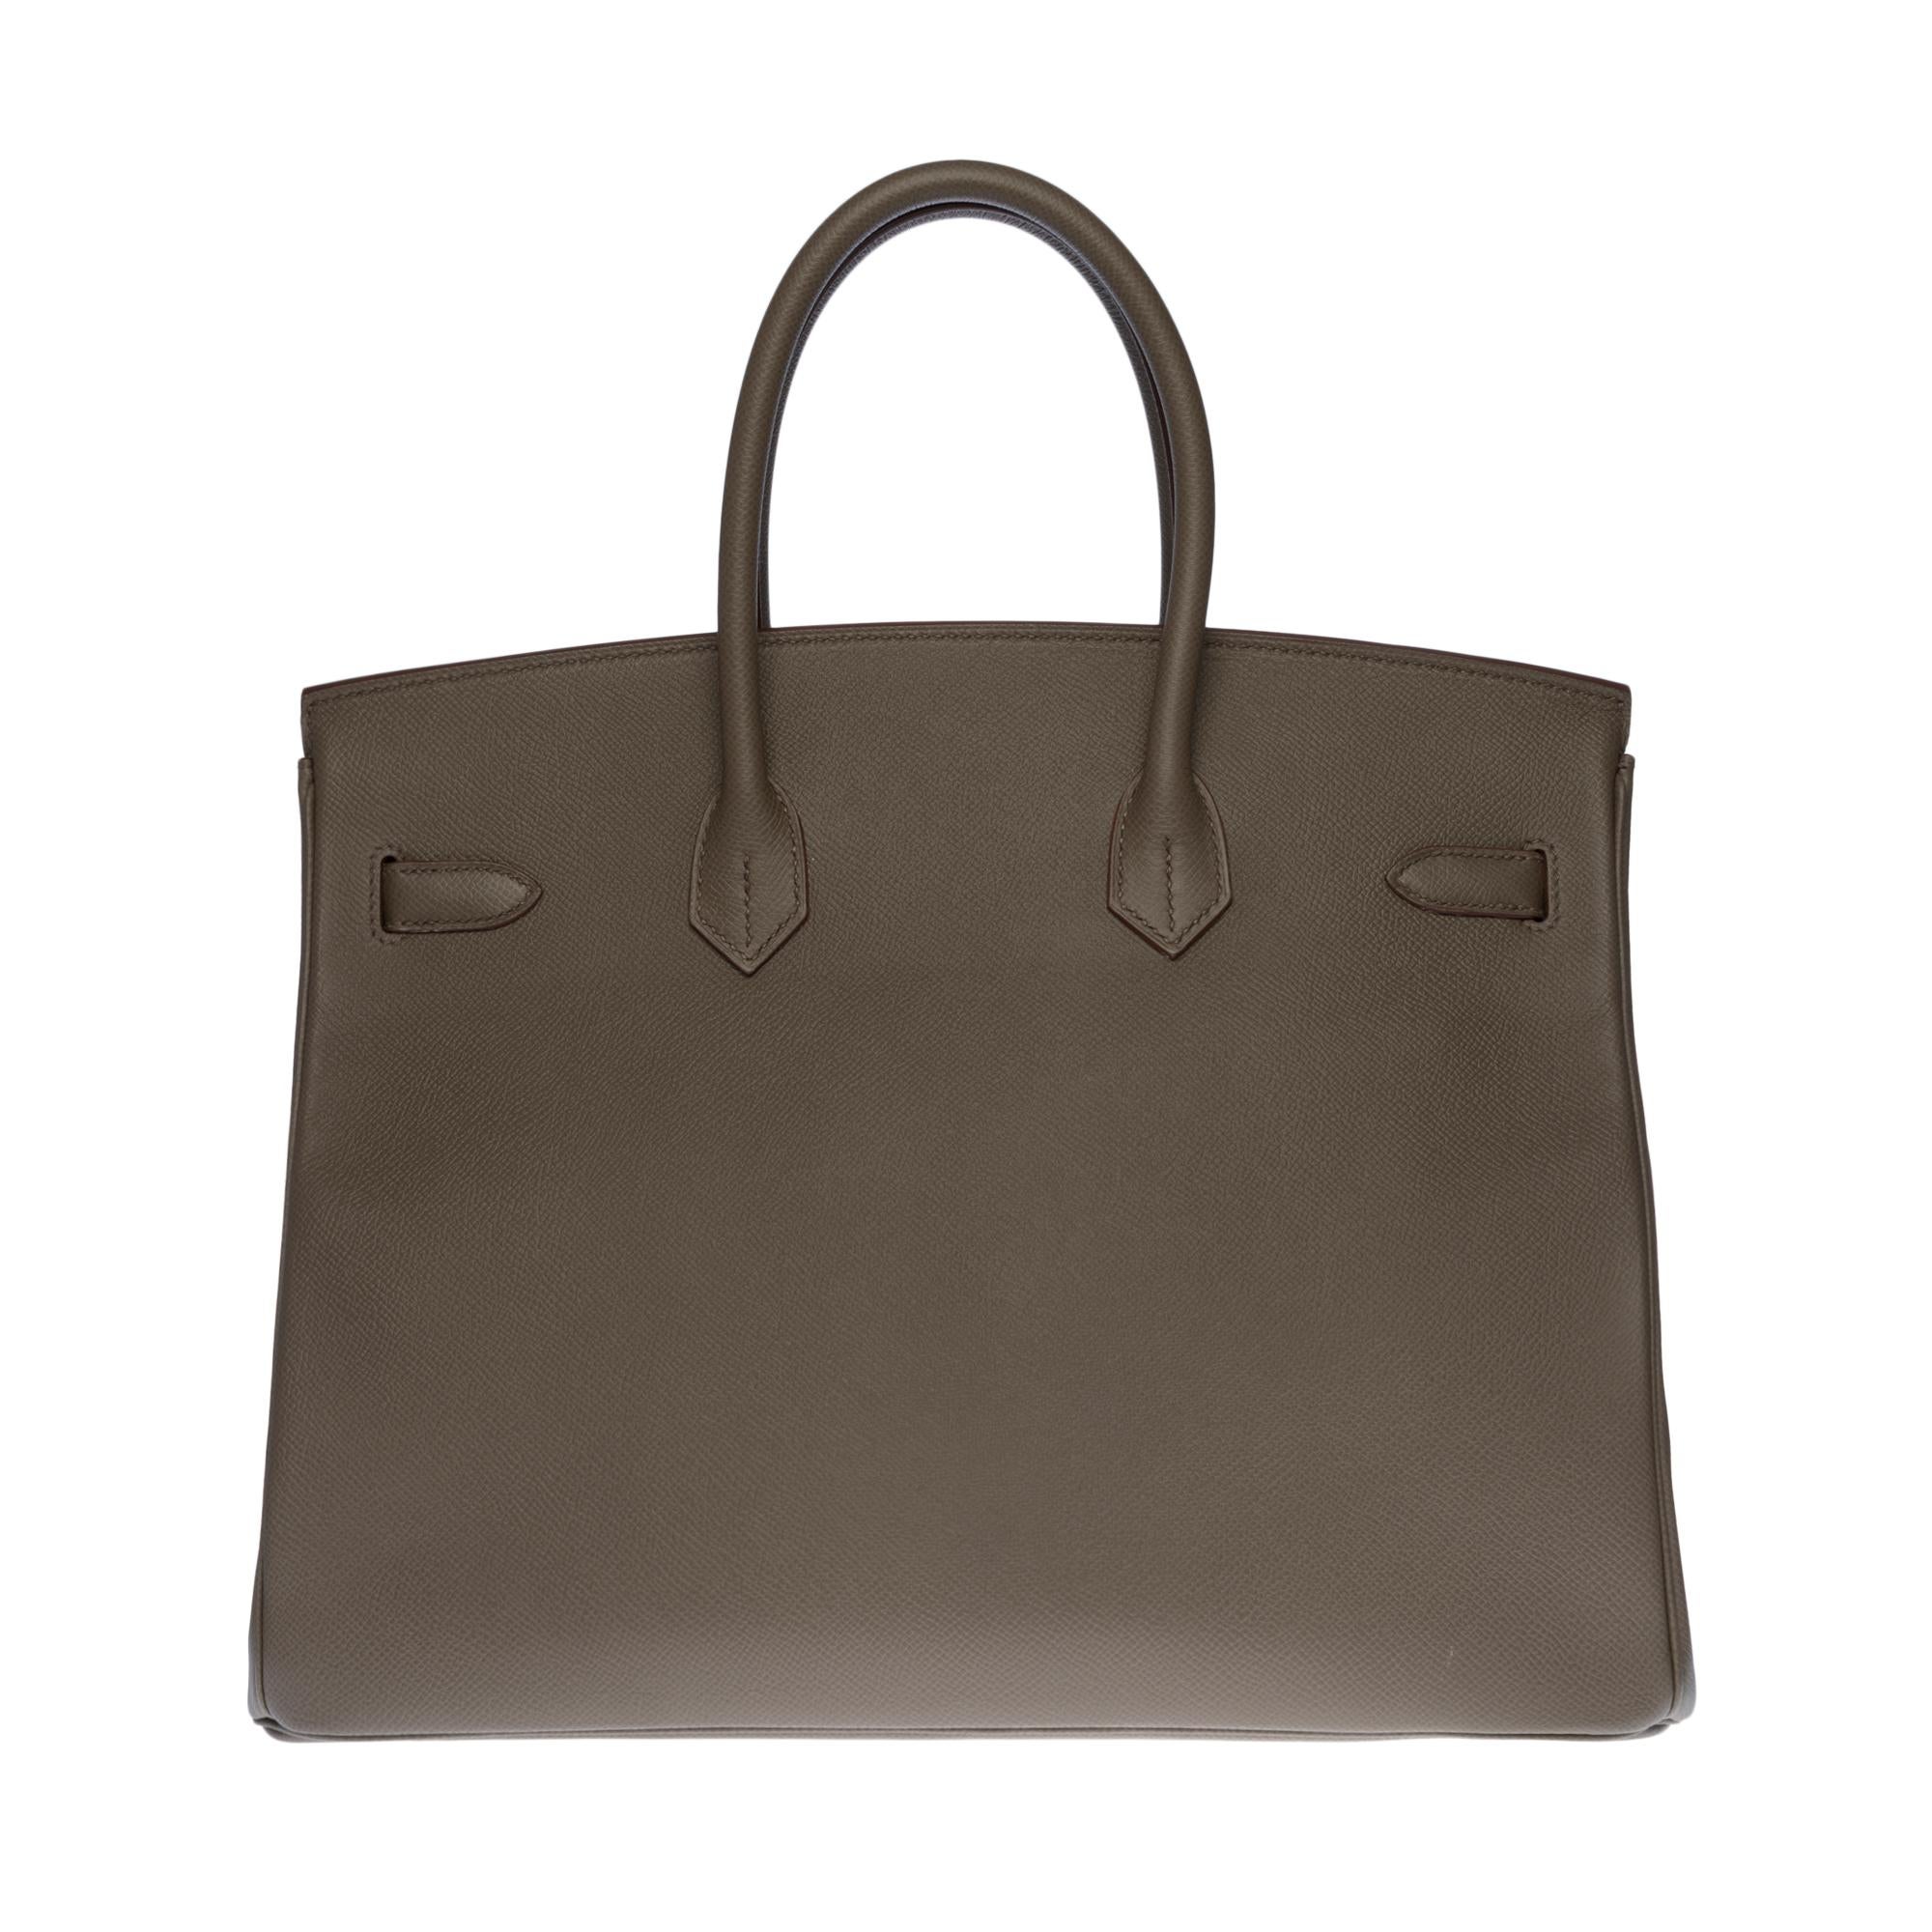 Beautiful Hermes Birkin 35 cm handbag in grey Epsom Etain leather, palladium silver metal hardware, double handle in grey leather allowing a handheld.

Closure by flap.
Lining in grey leather, a zipped pocket, a patch pocket.
Signature: 